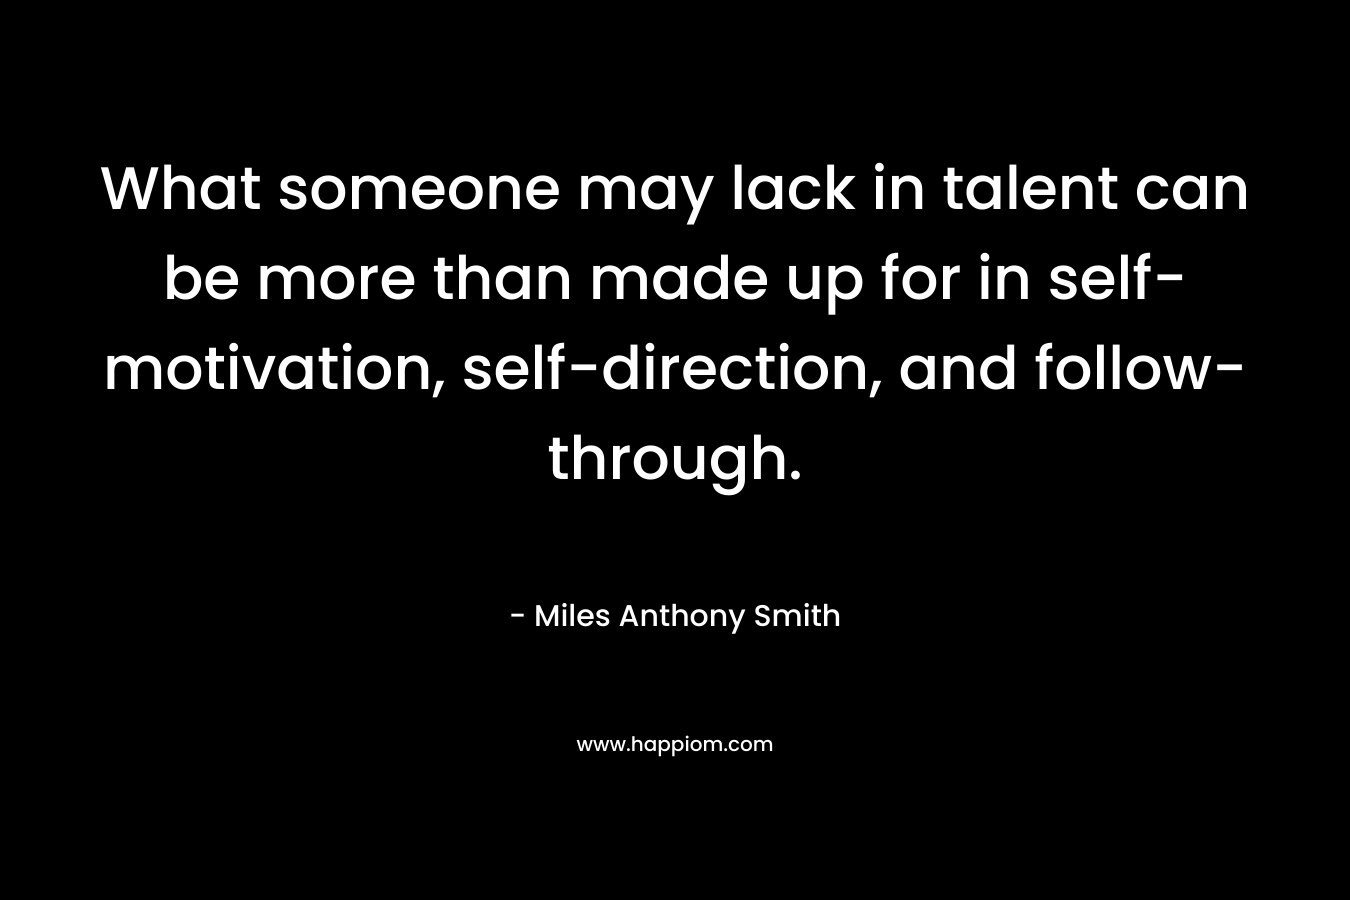 What someone may lack in talent can be more than made up for in self-motivation, self-direction, and follow-through. – Miles Anthony Smith